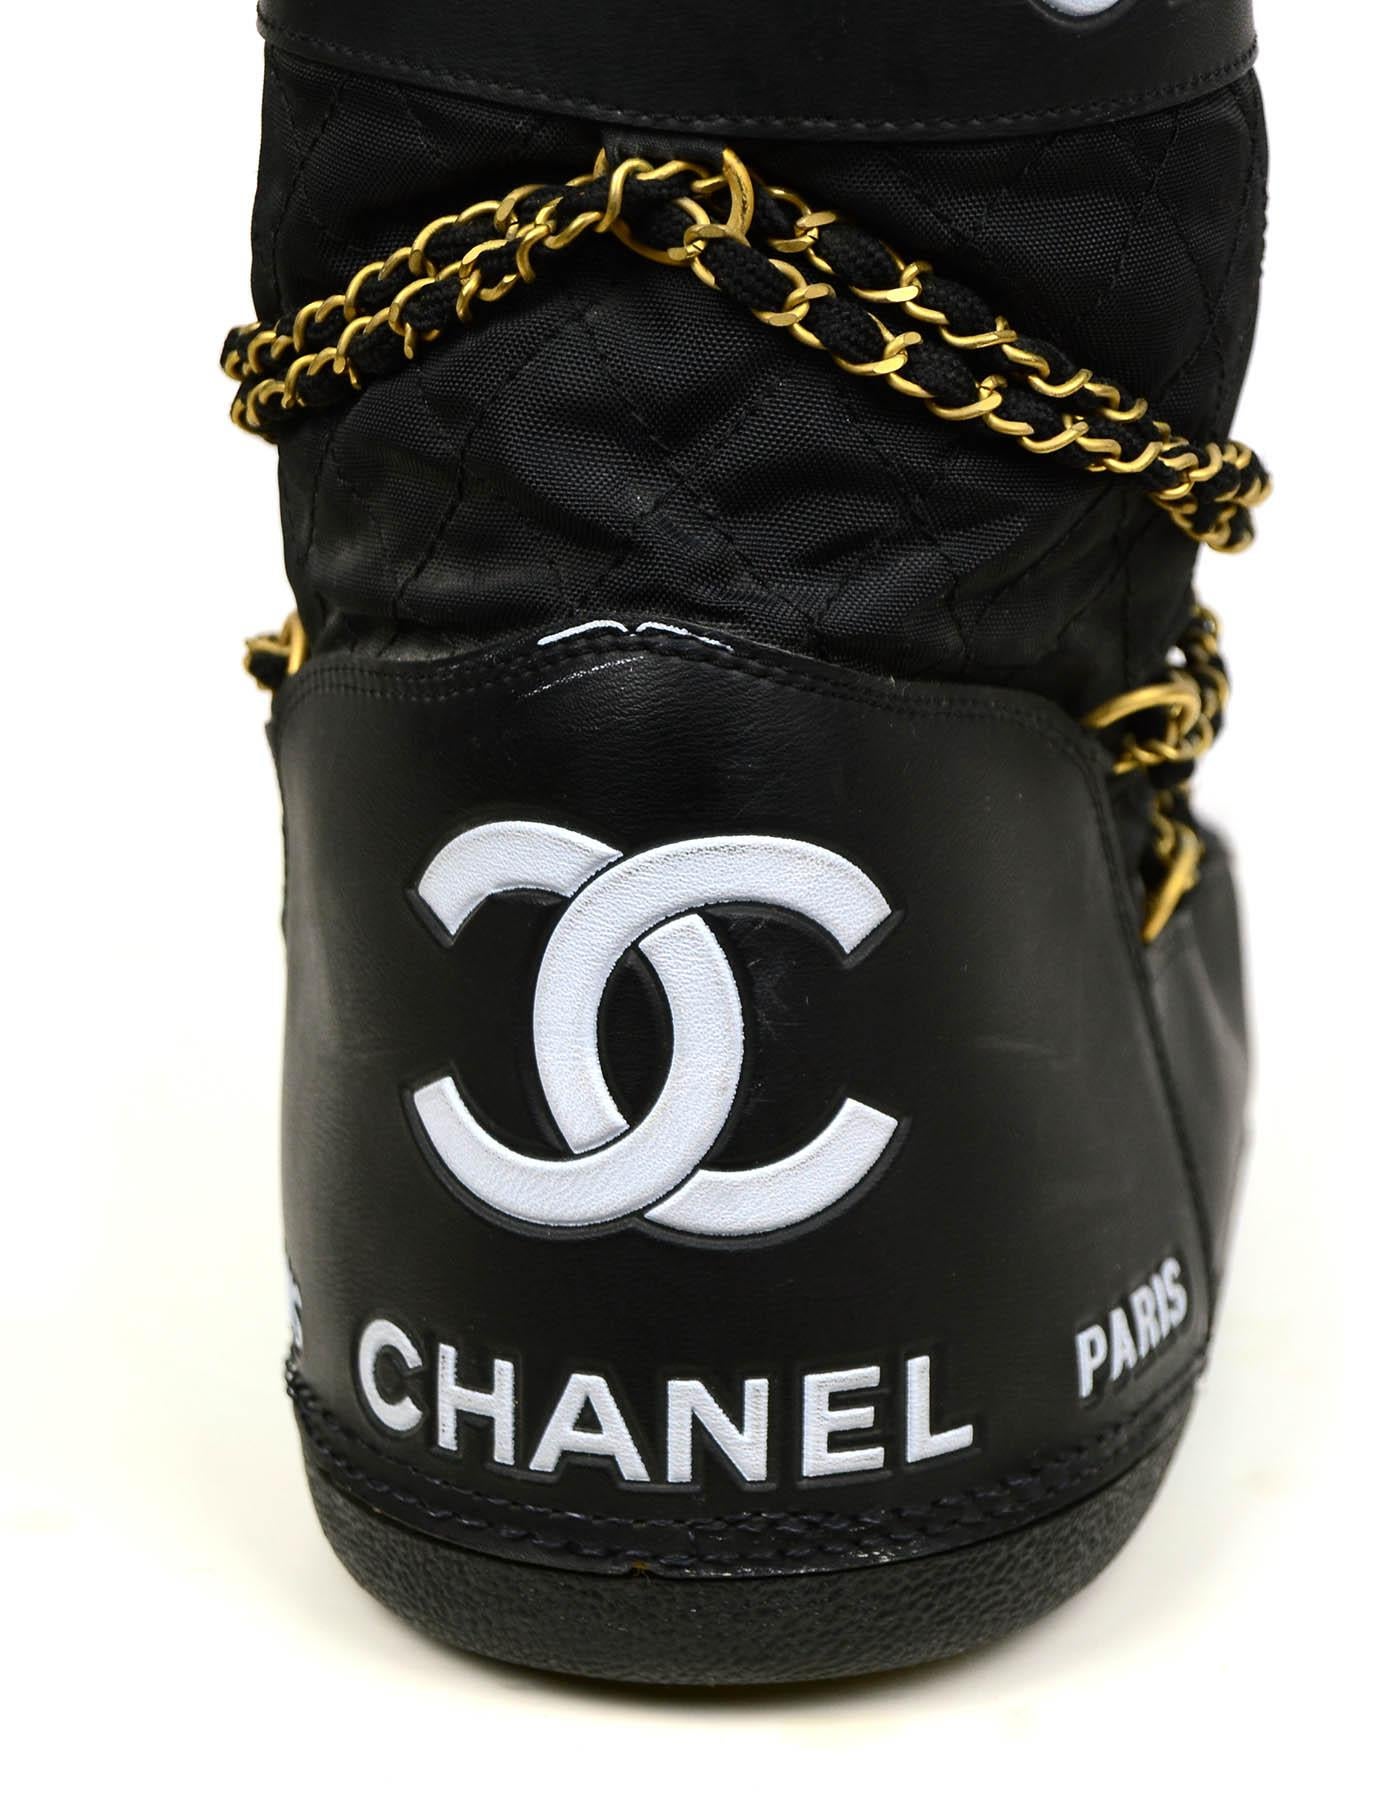 Chanel Rare Iconic 1990’s Vintage Moon Boots sz 41-43 3